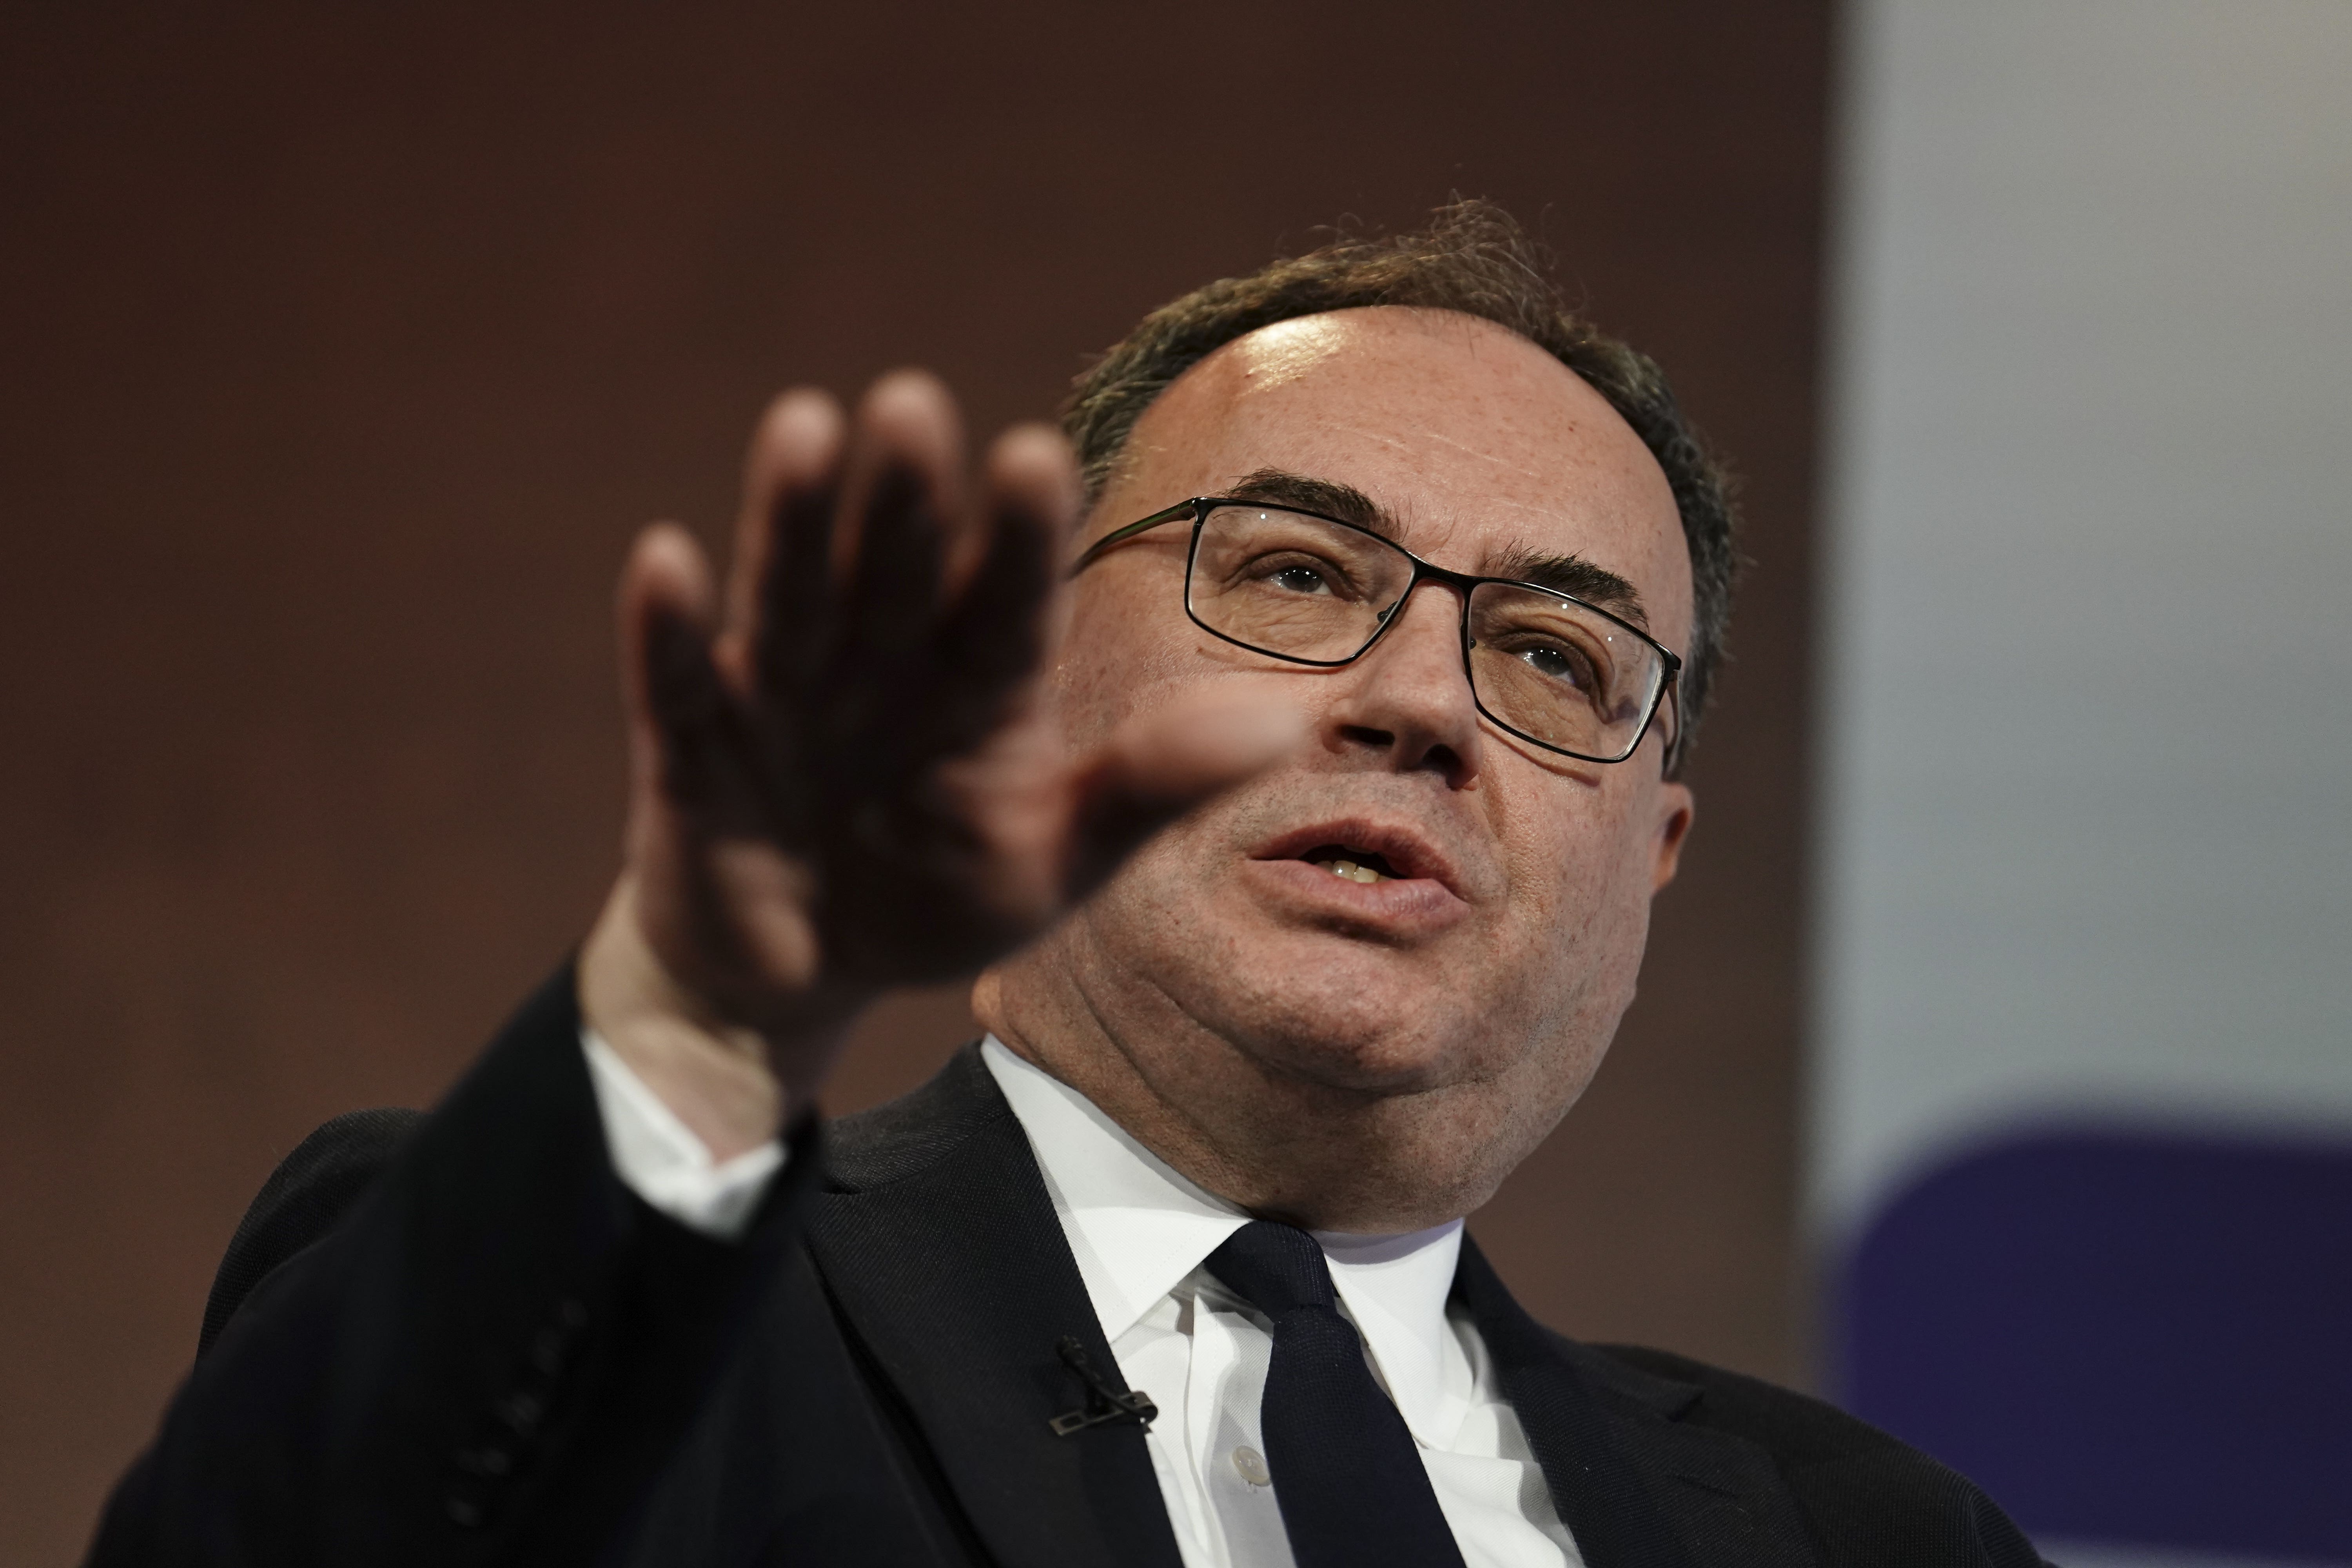 The hapless Andrew Bailey is at the head of a herd of sheep even as the inflationary wolves have been howling at the door, tearing strips of ordinary working people